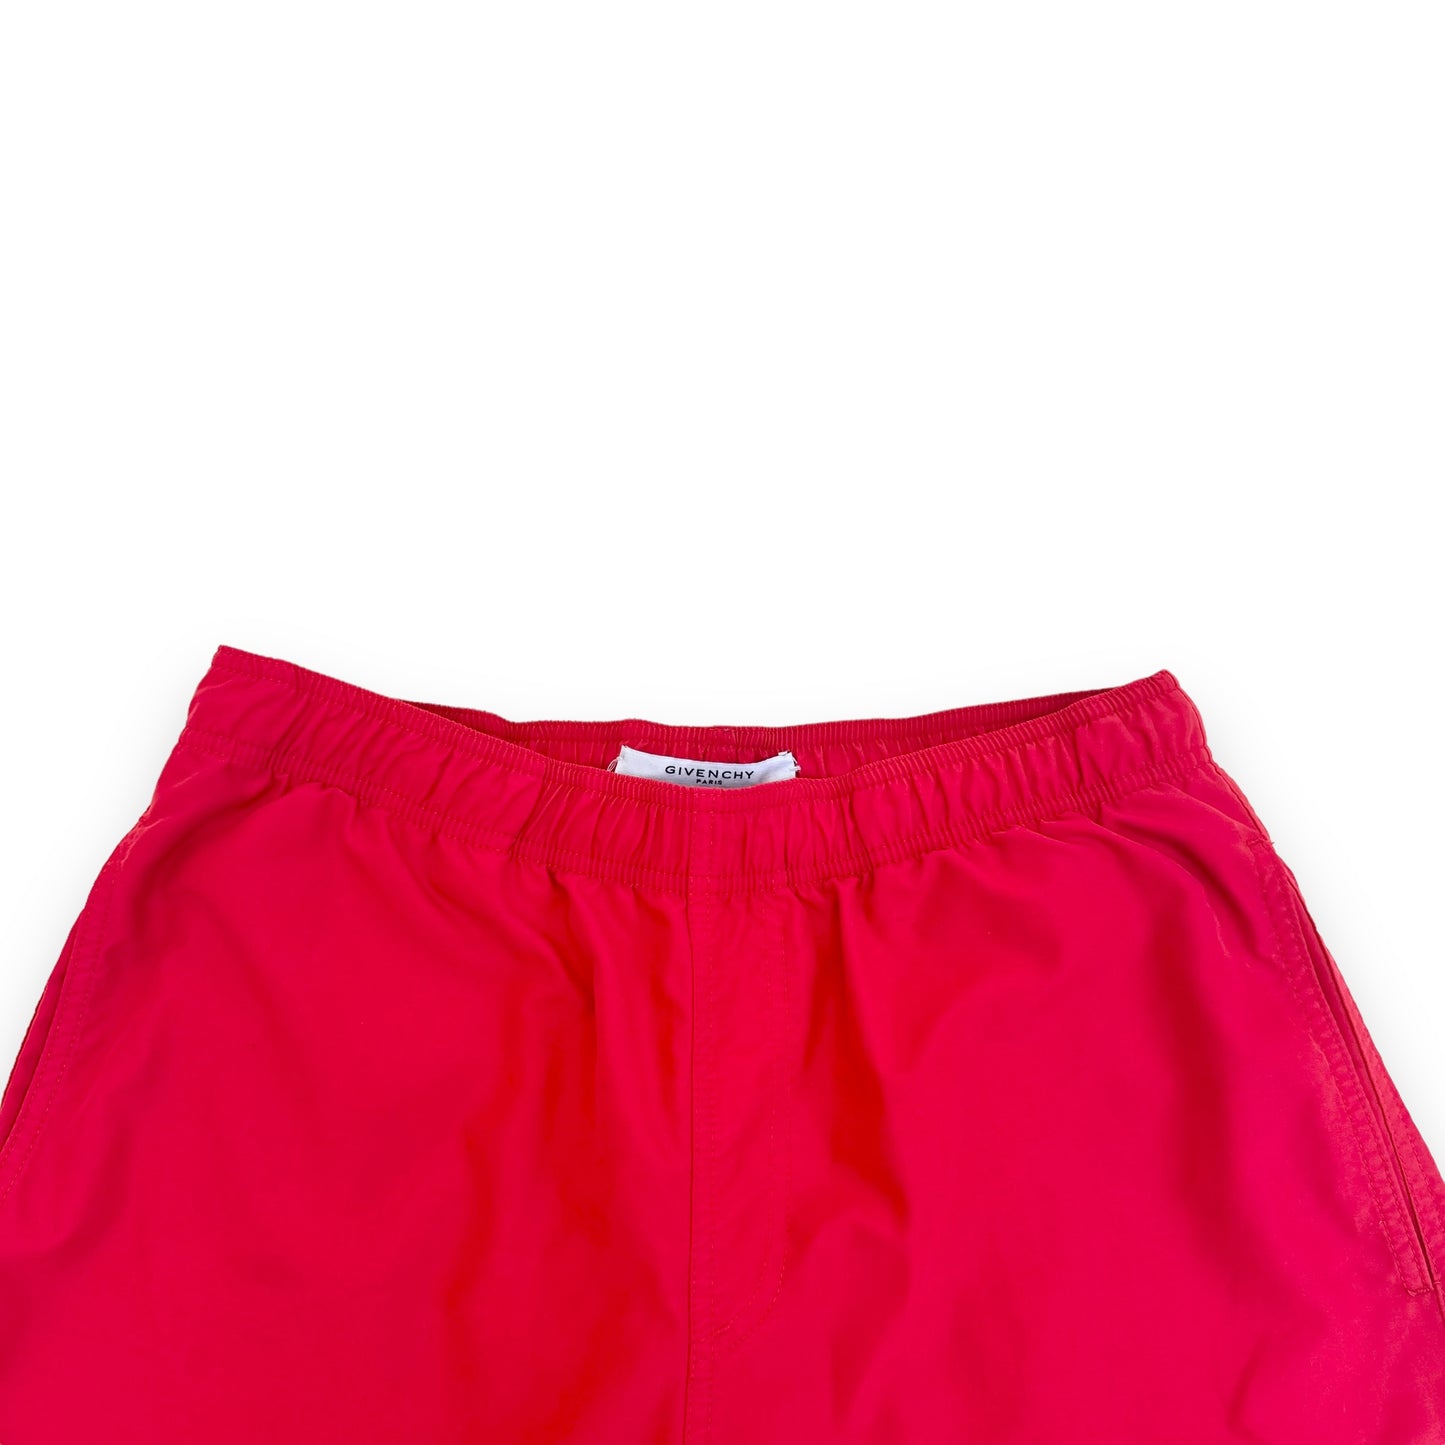 GIVENCHY SWIM SHORTS RED XL